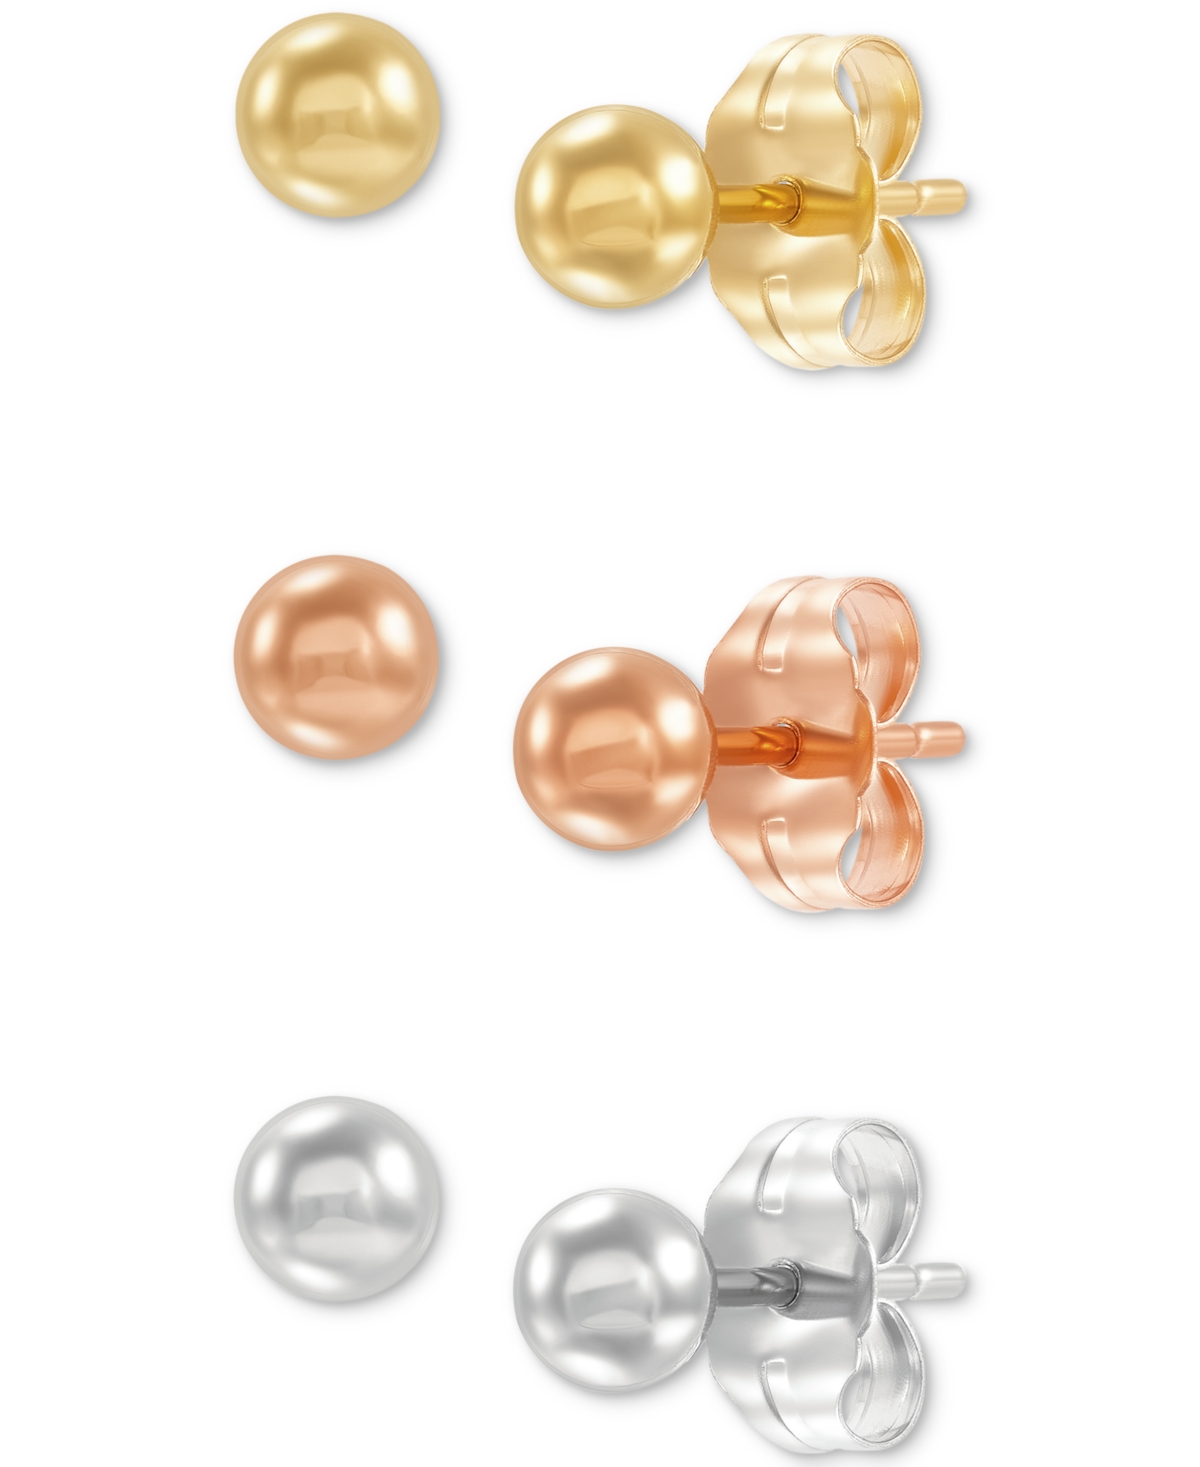 Macy's 3-pc. Set Polished Ball Stud Earrings In 14k Tricolor Gold